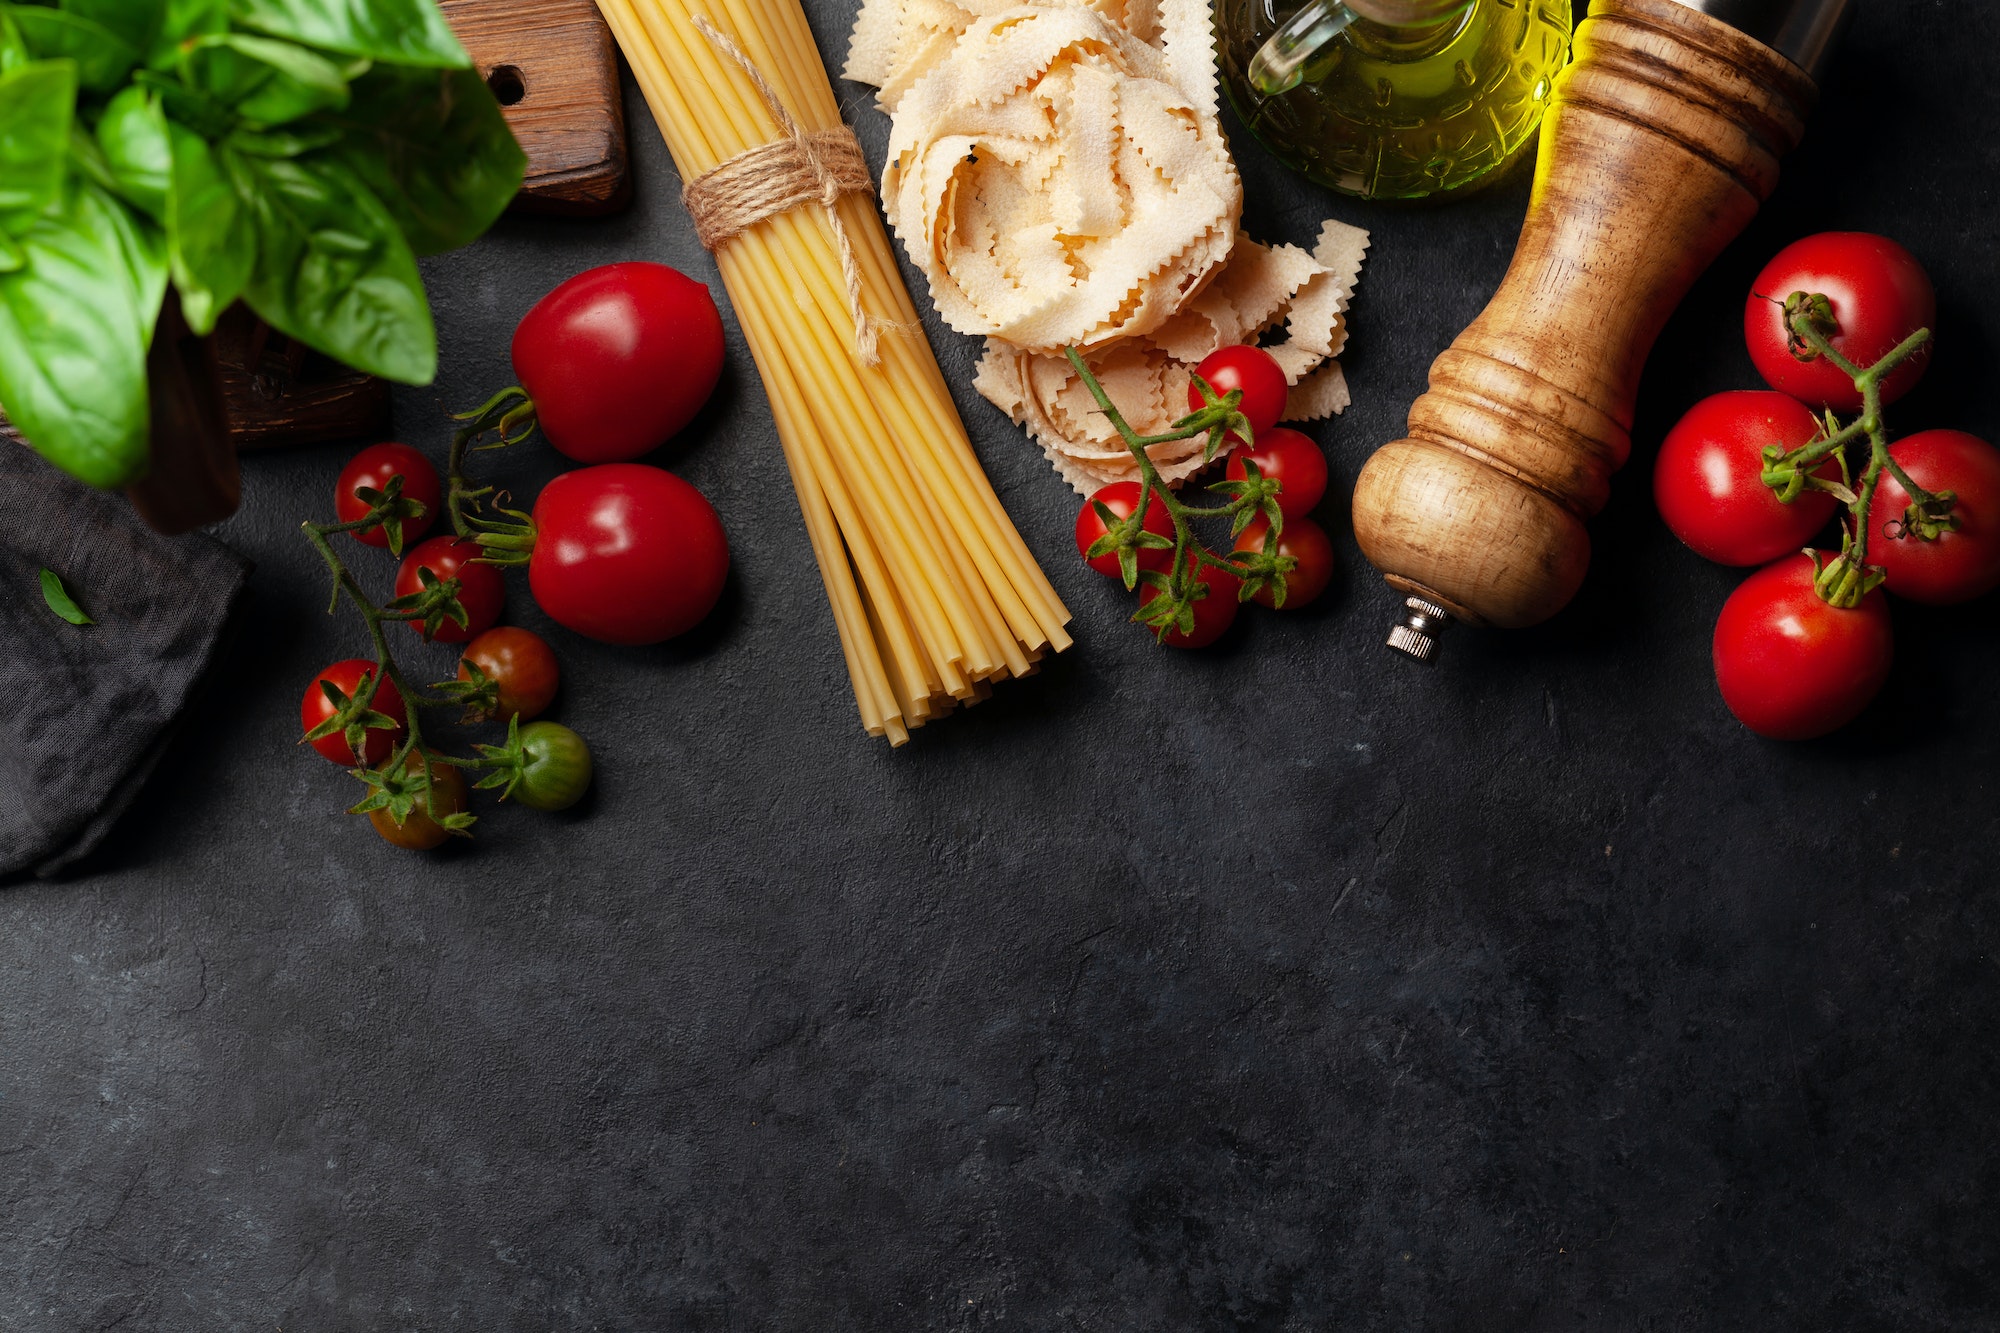 Italian cuisine food ingredients. Pasta, tomatoes, basil and spices